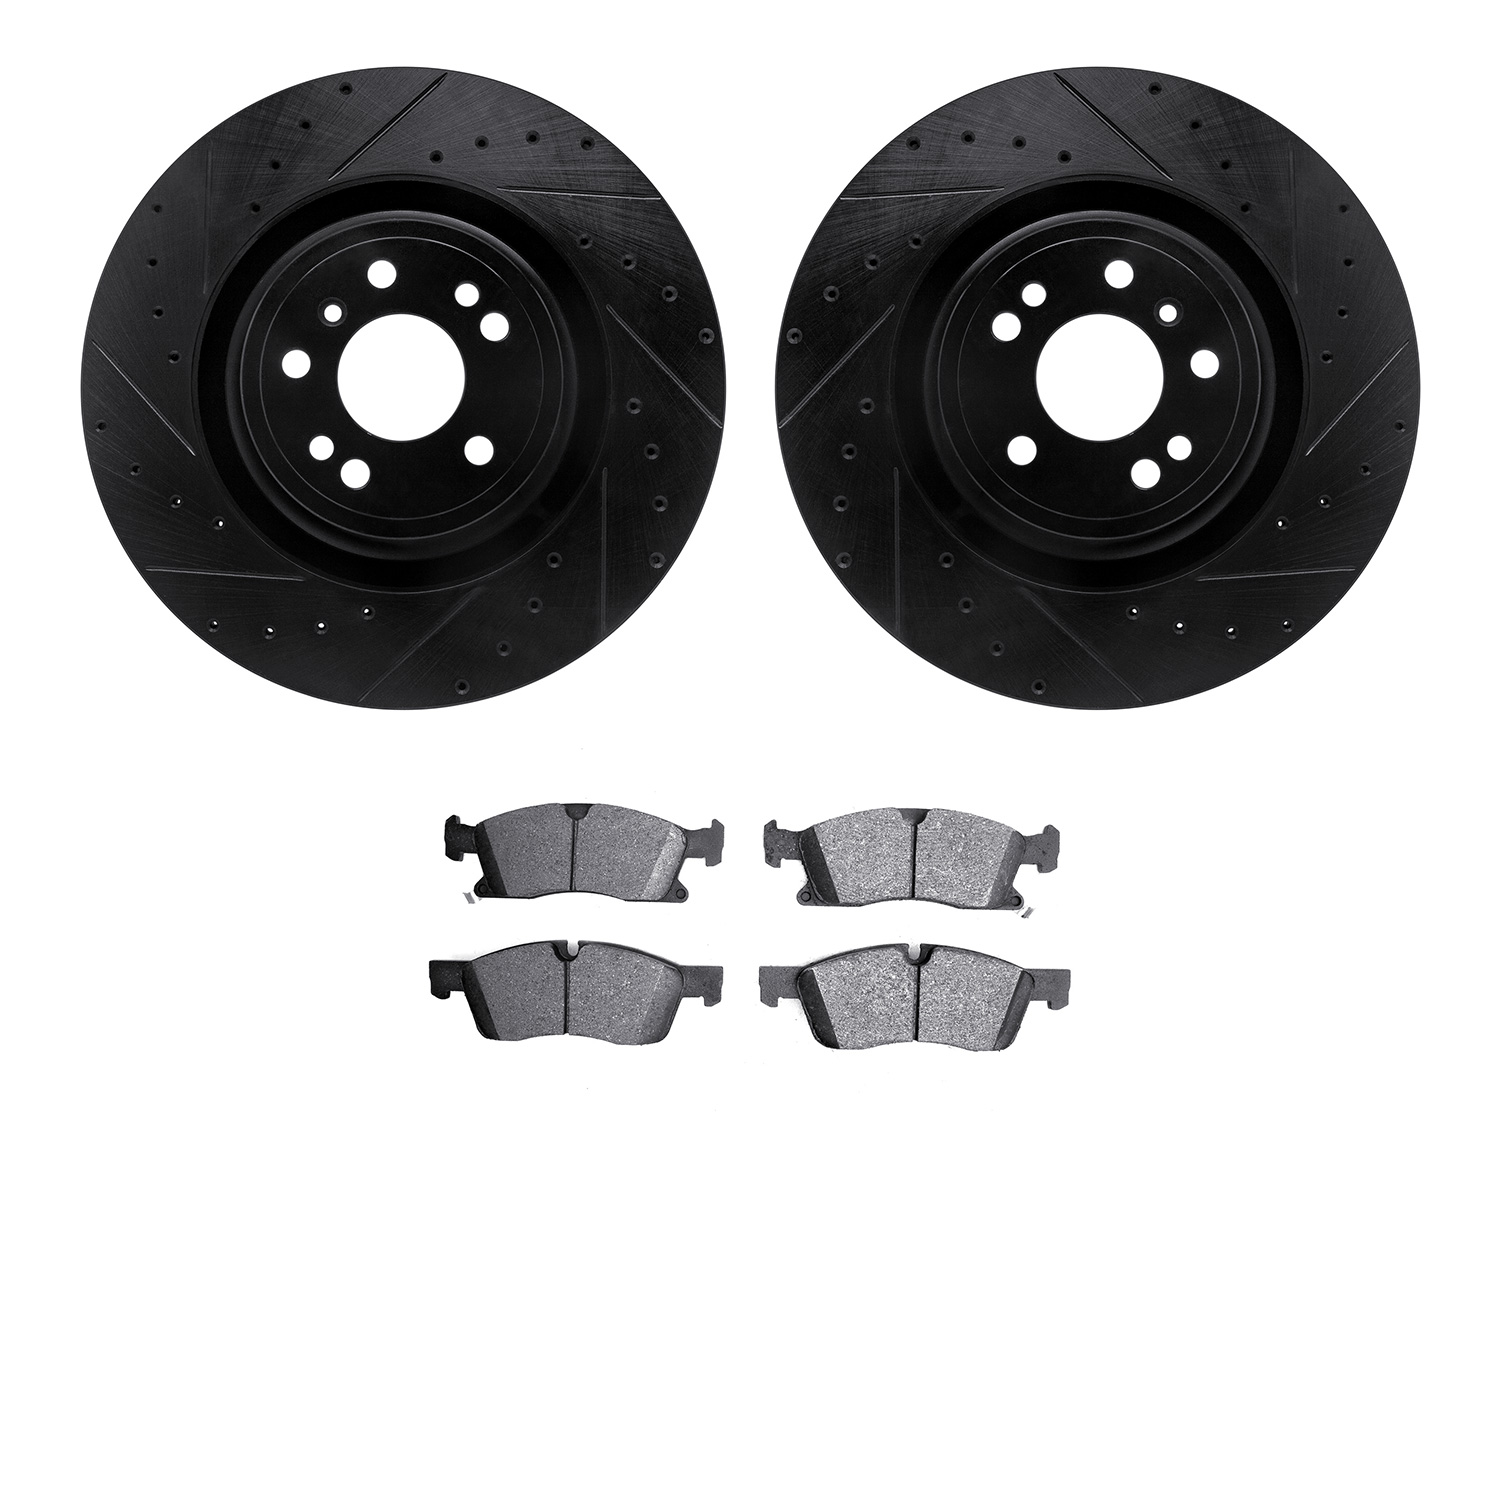 8302-63147 Drilled/Slotted Brake Rotors with 3000-Series Ceramic Brake Pads Kit [Black], 2013-2019 Mercedes-Benz, Position: Fron